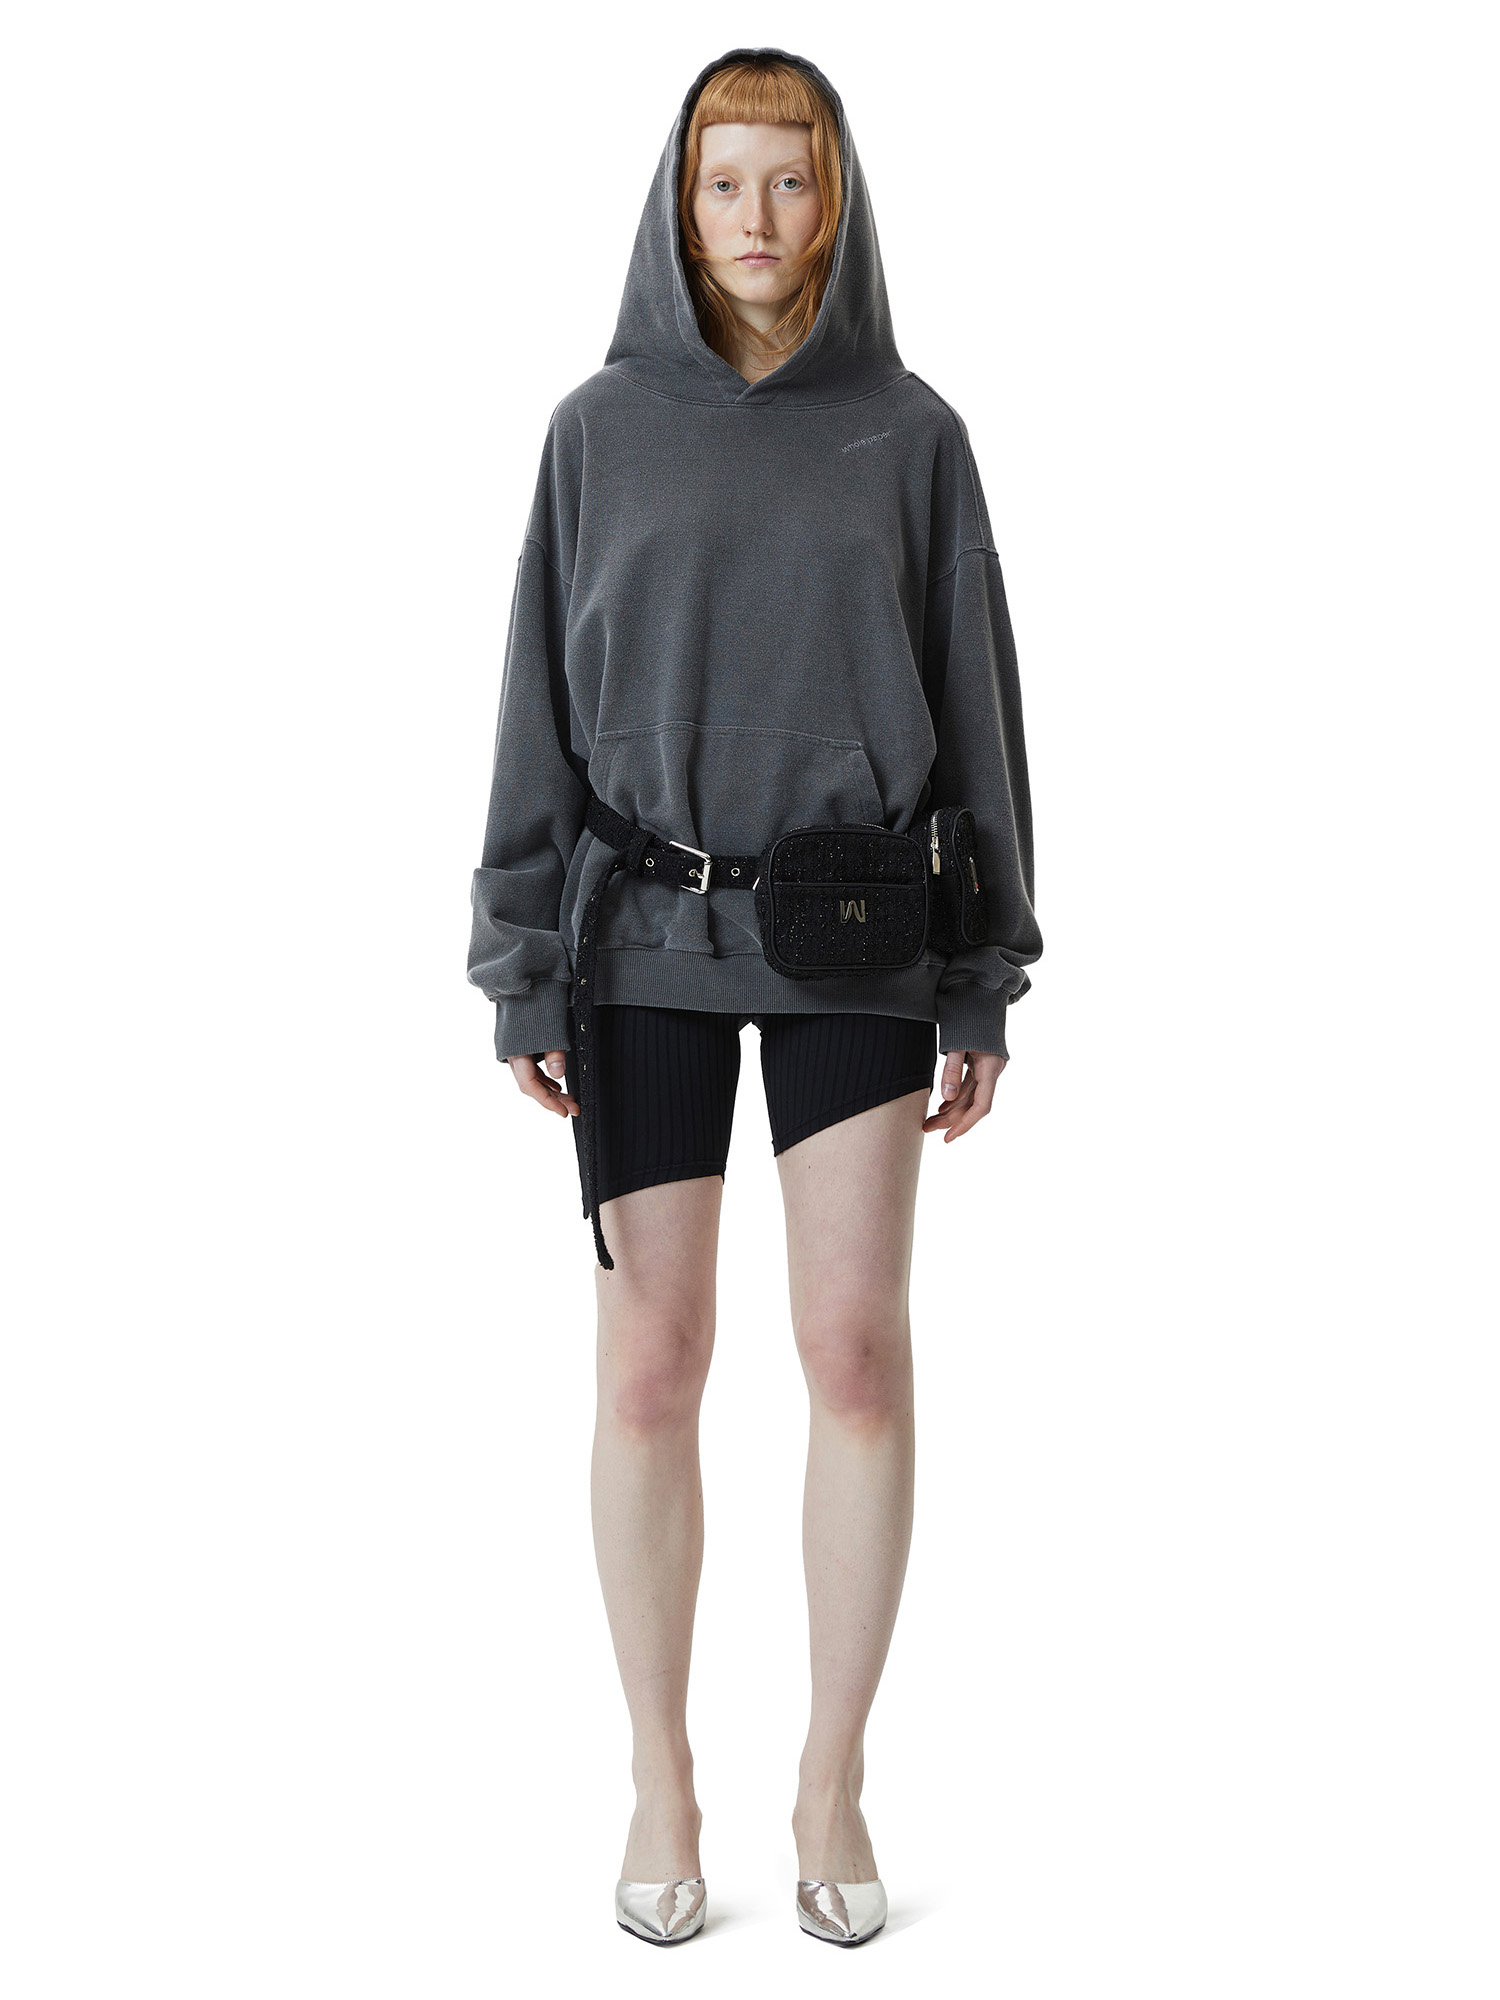 Cut-Out Pigment Hoodie - Charcoal